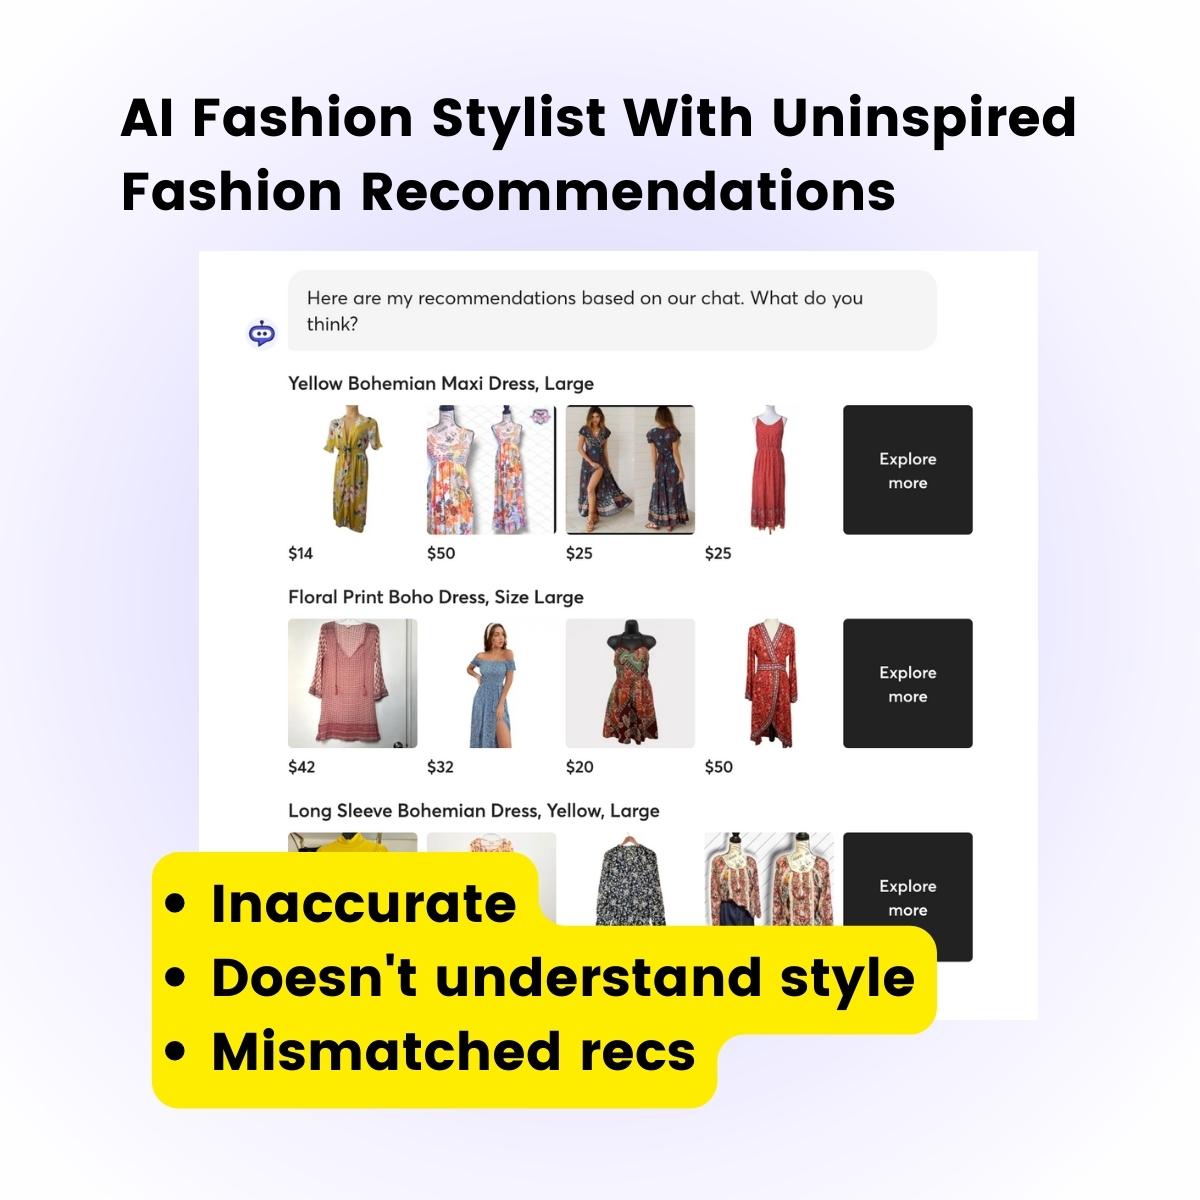 A poor example of AI fashion styling